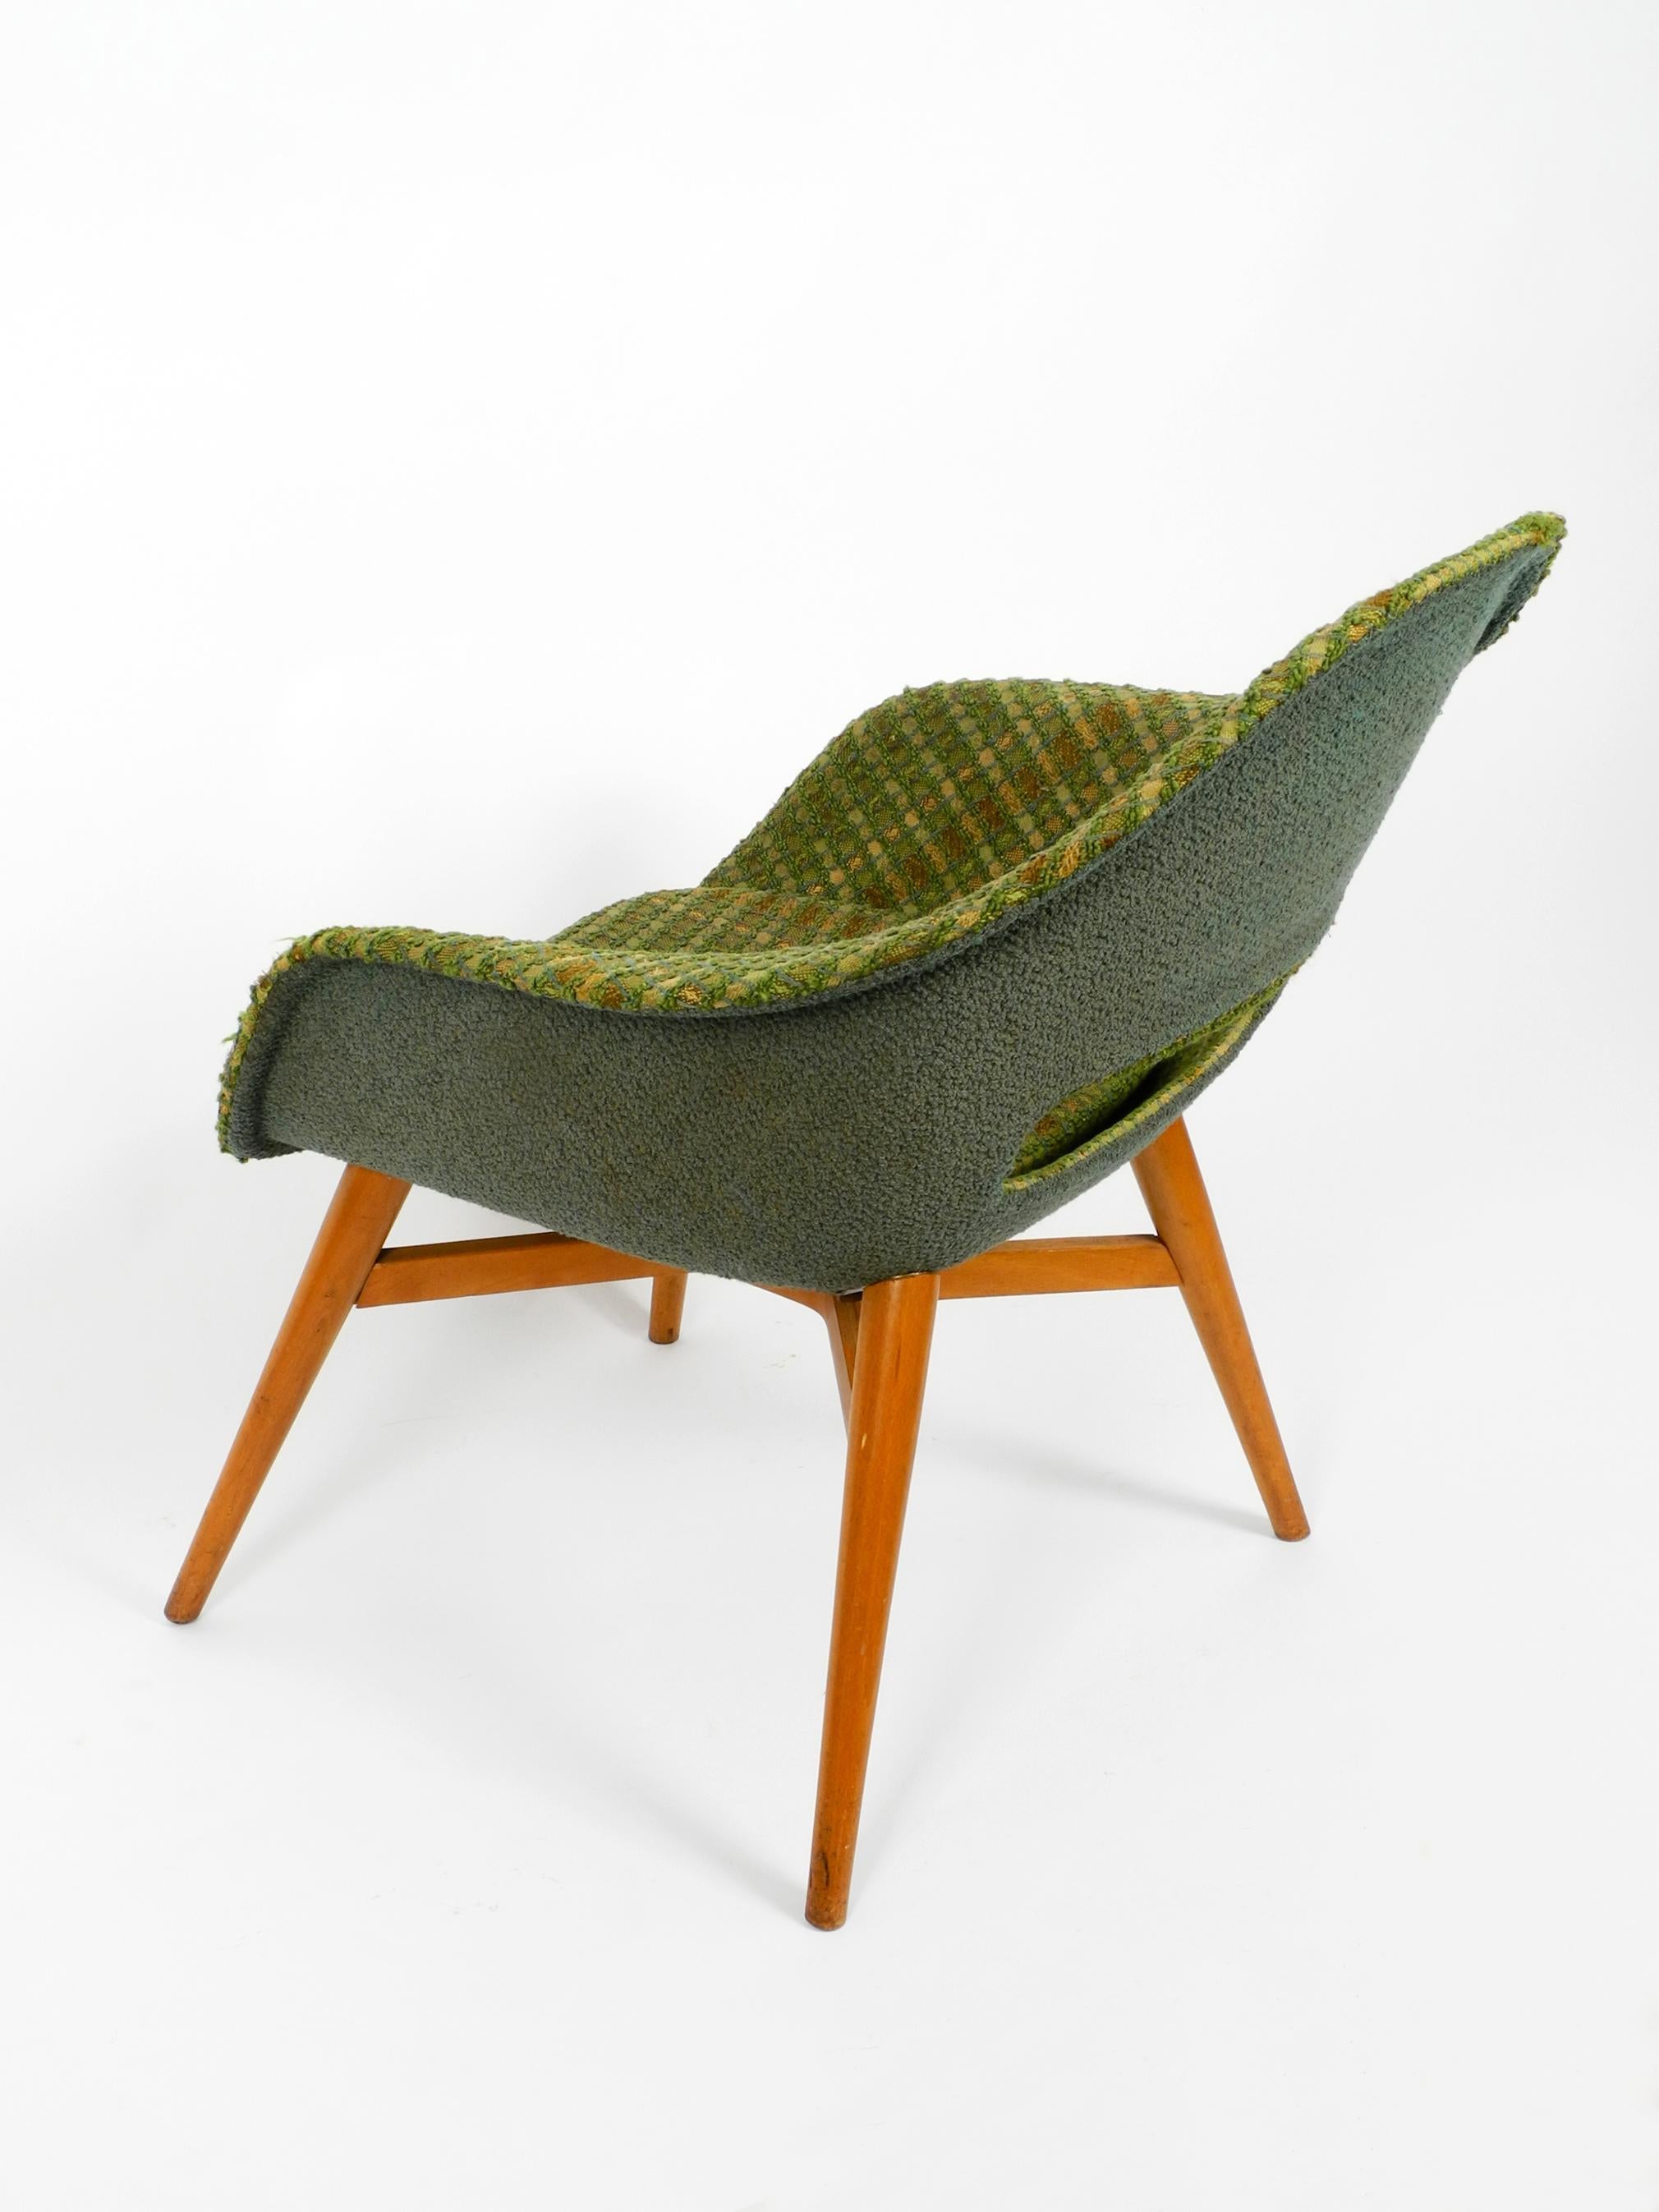 1960s Lounge Chair by Miroslav Navratil with Fiberglass Shell and Original Cover 9